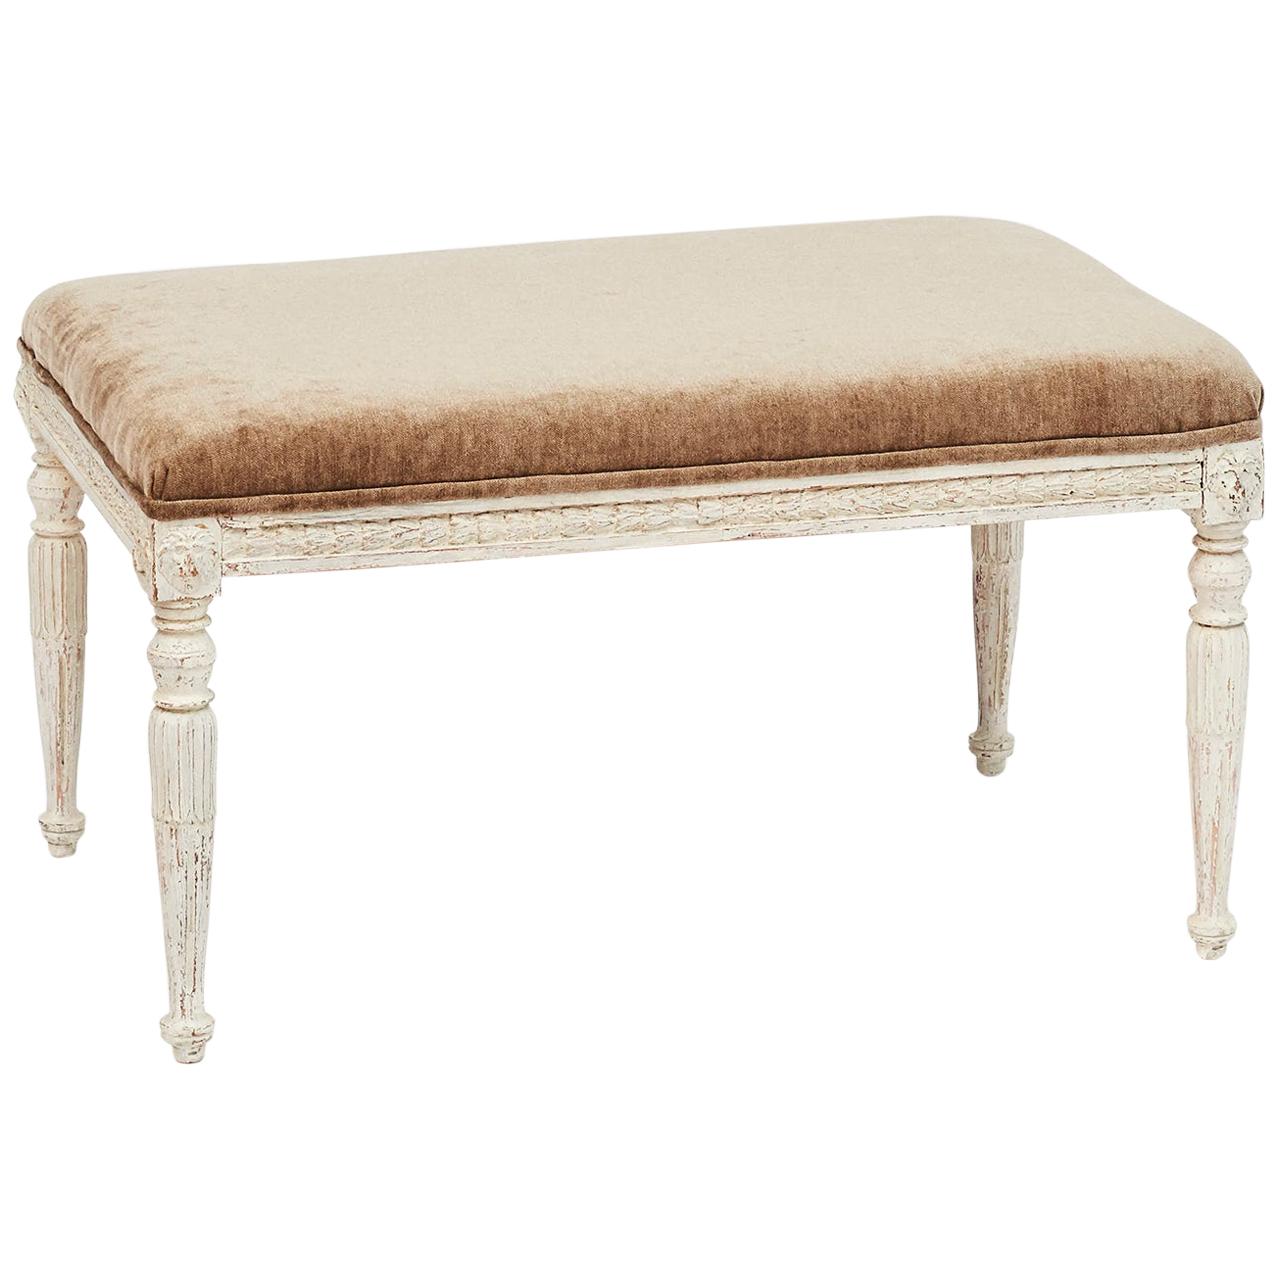 Swedish 19th Century Gustavian Style Bench with Upholstered Seat